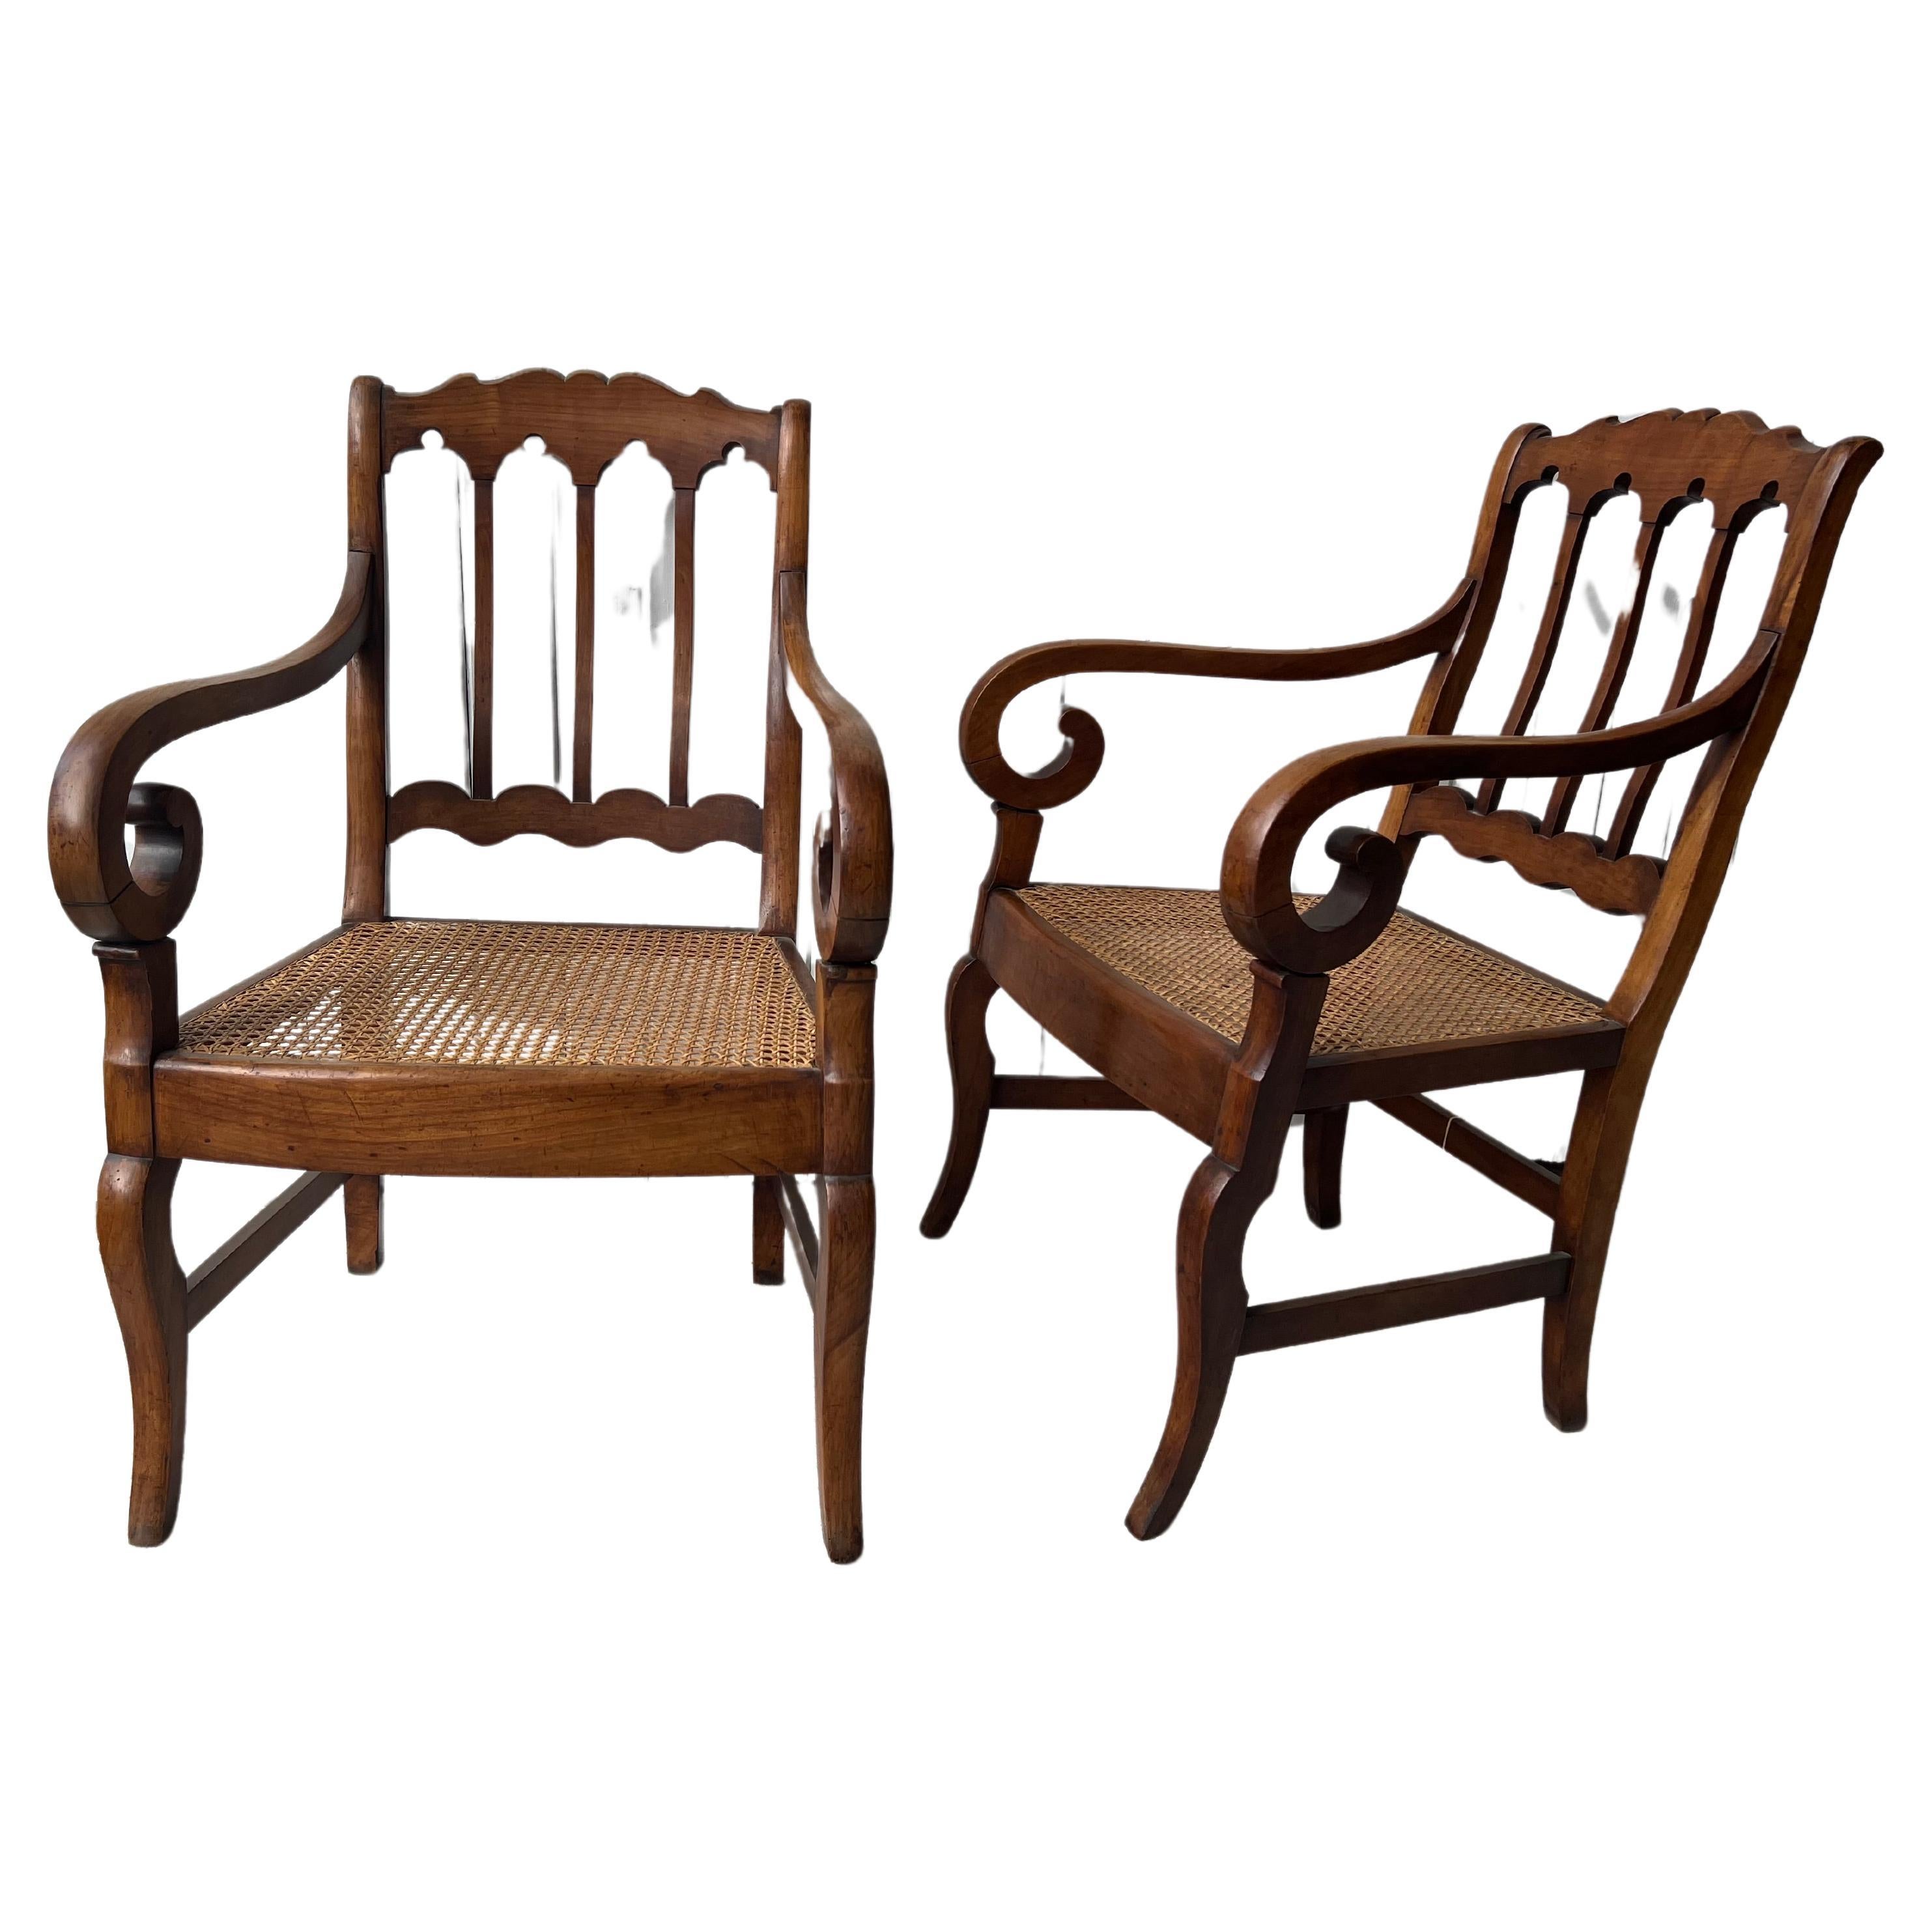 Pair of Restauration Armchairs , 18 th Century France